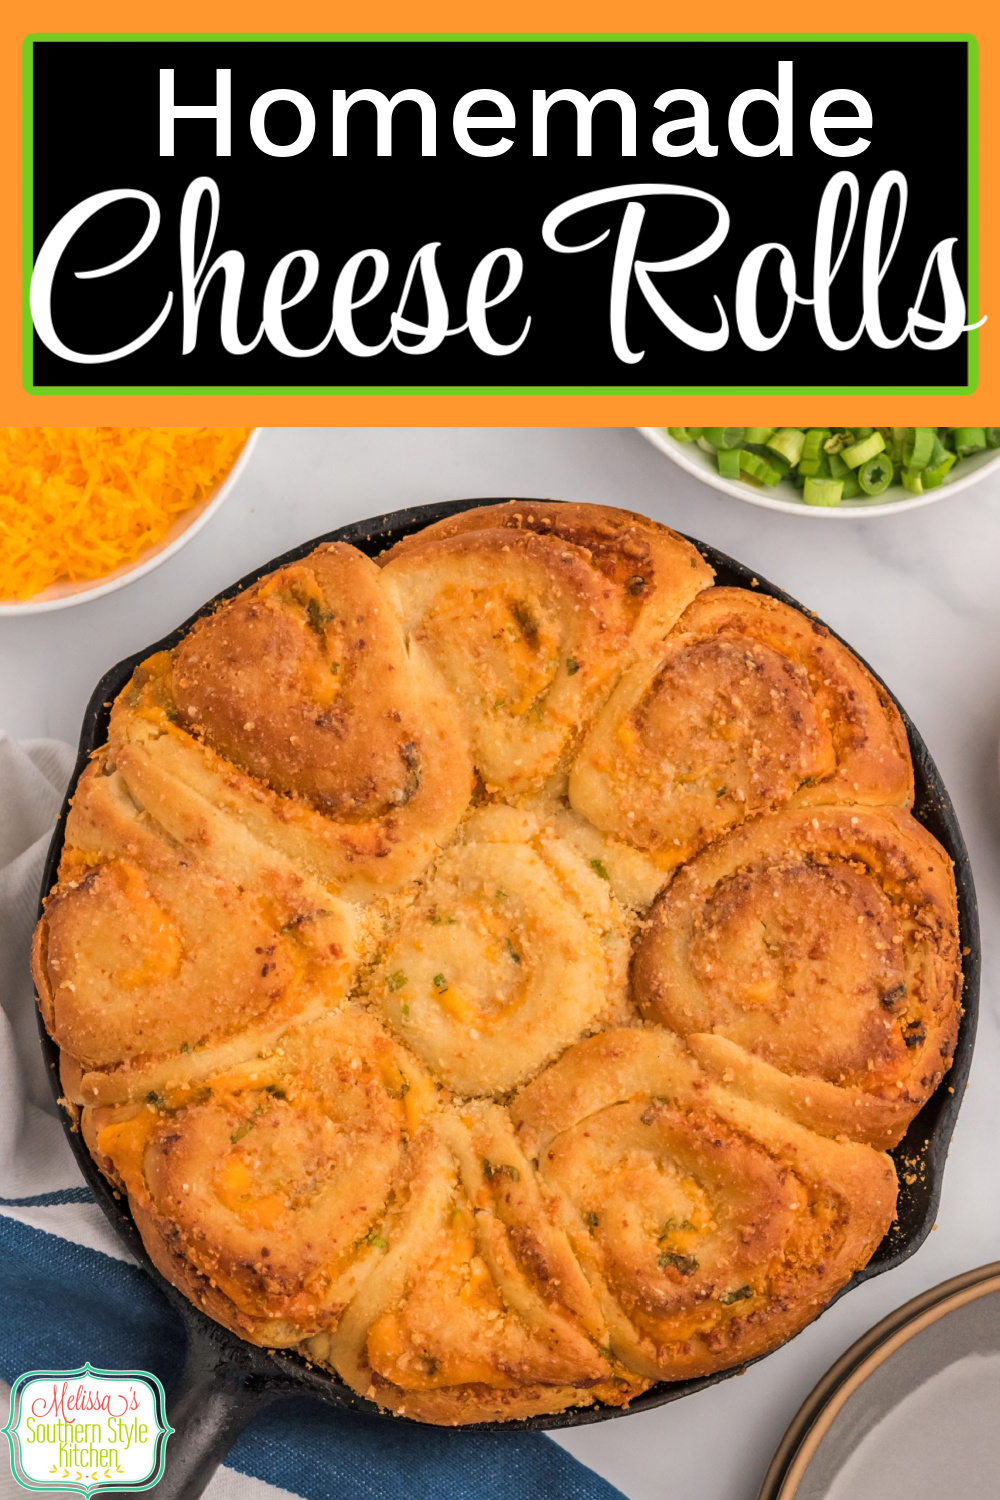 This homemade Cheese Rolls recipe is a delicious savory riff on cinnamon rolls stuffed with a buttery cheddar cheese filling #cheeserolls #homemaderolls #breadrecipes #easyyeastrolls #rollsrecipe #bread #cheddarcheeserolls #cheesebread via @melissasssk